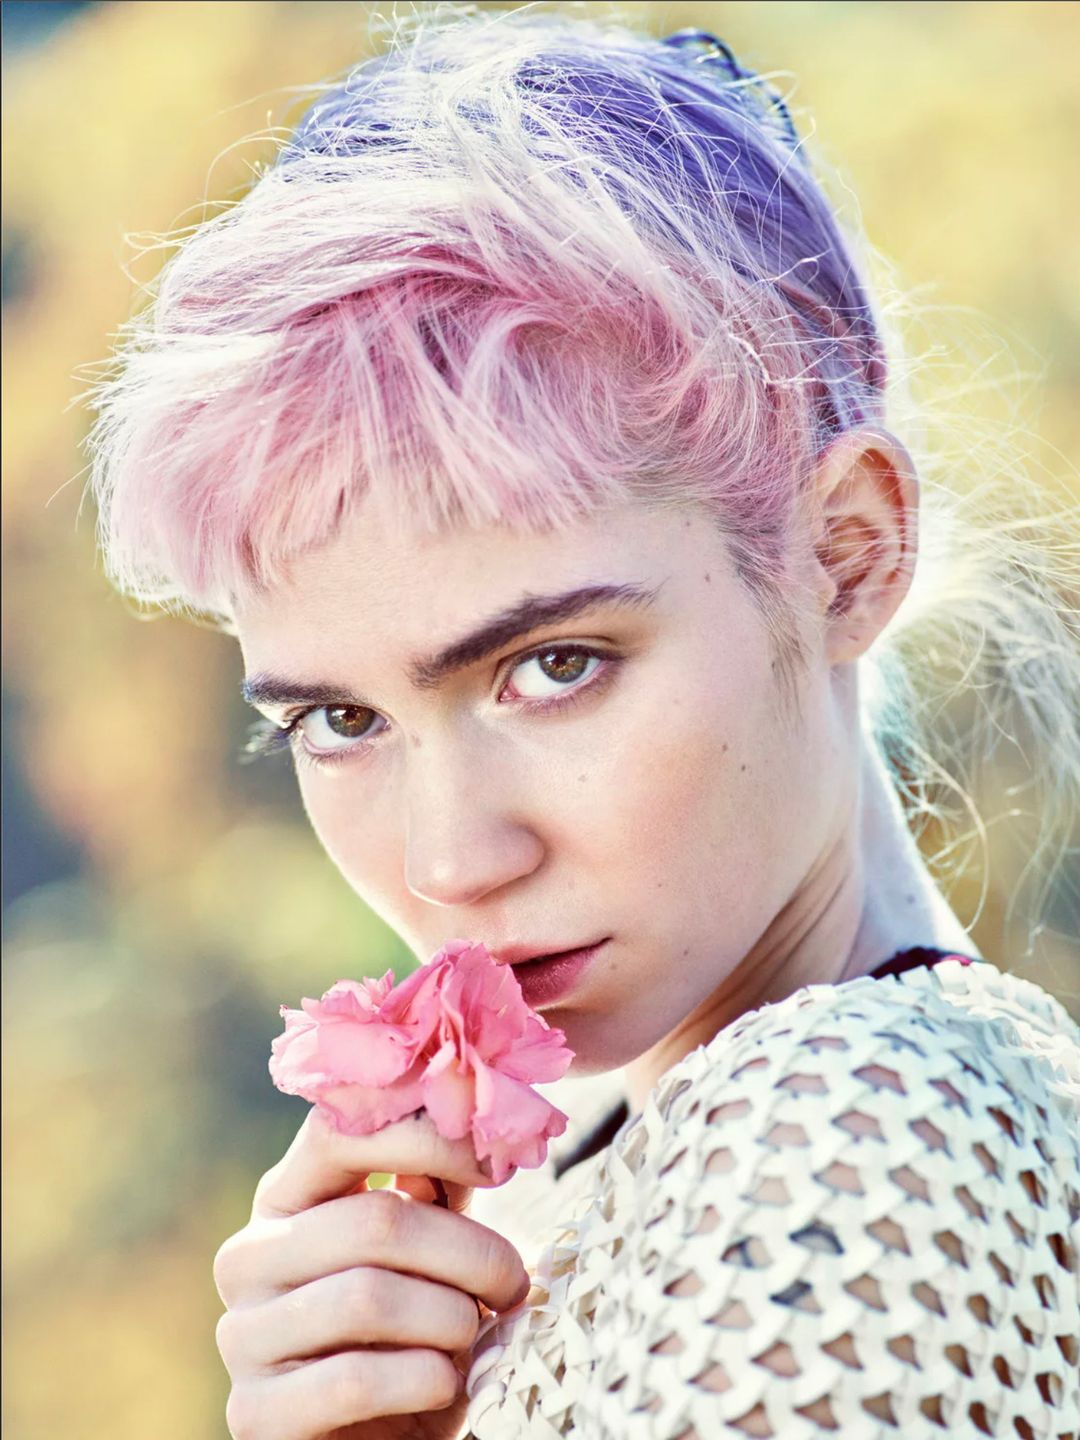 Grimes interesting facts